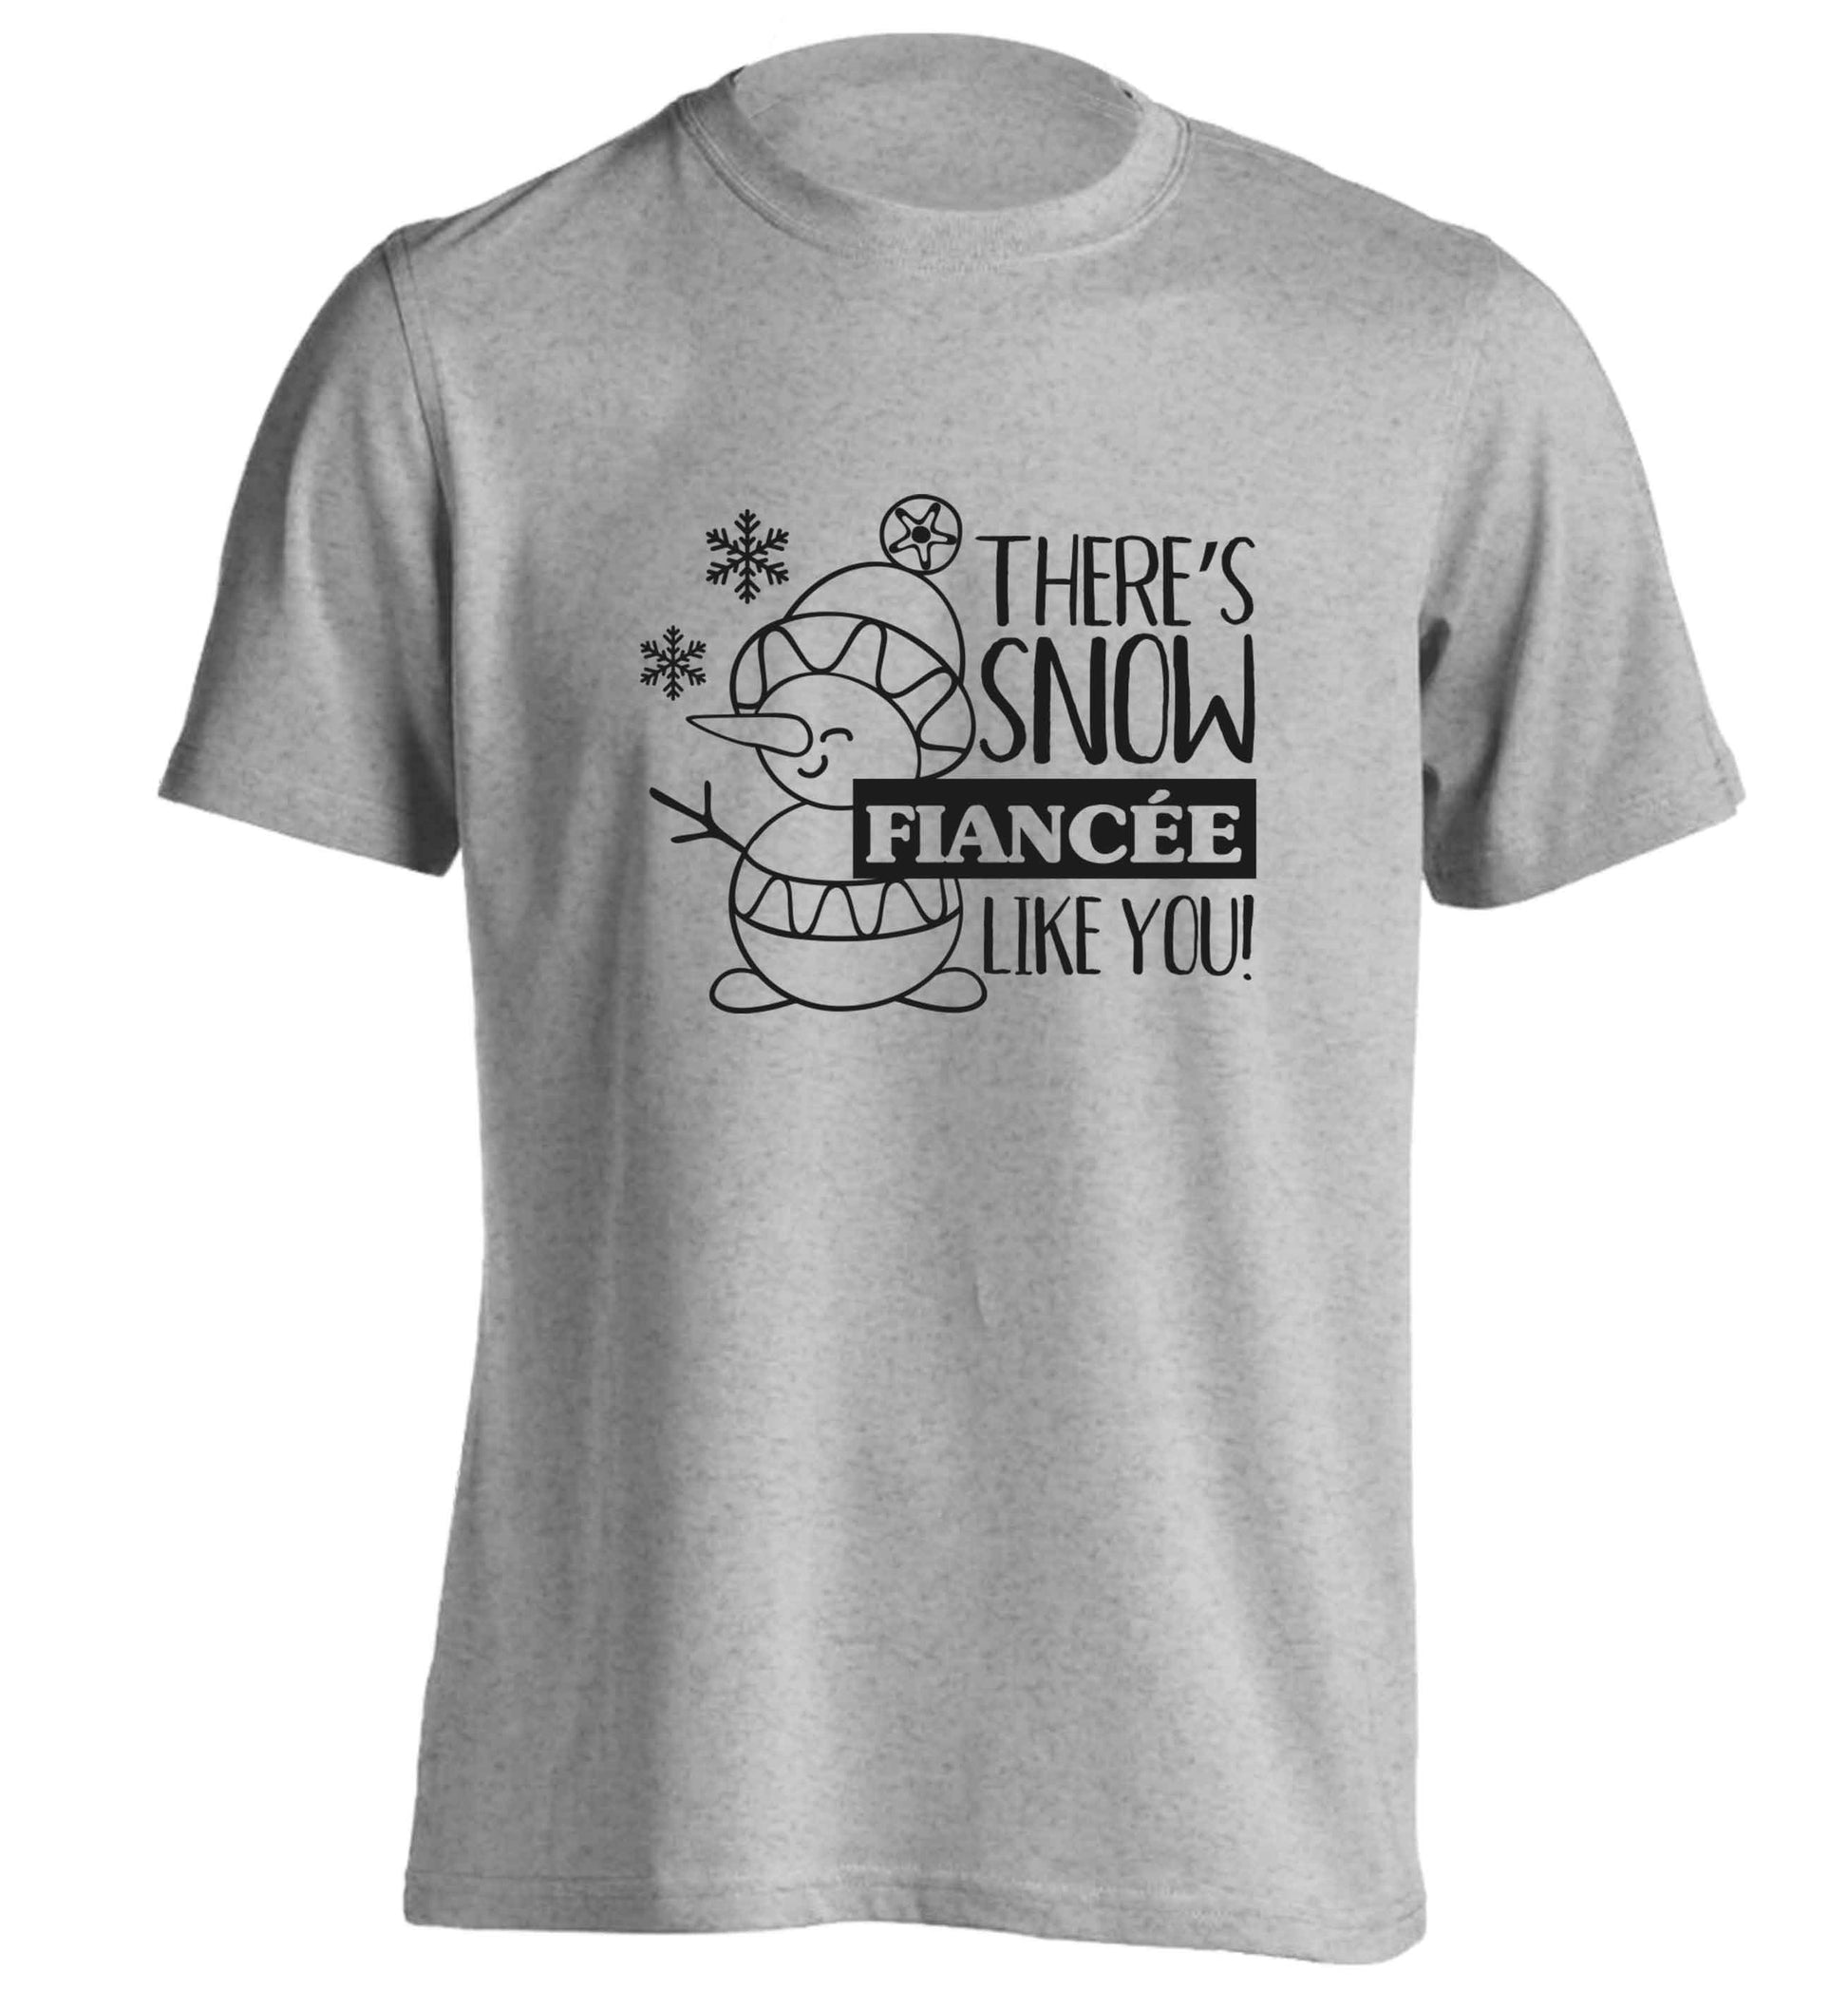 There's snow fiancee like you adults unisex grey Tshirt 2XL